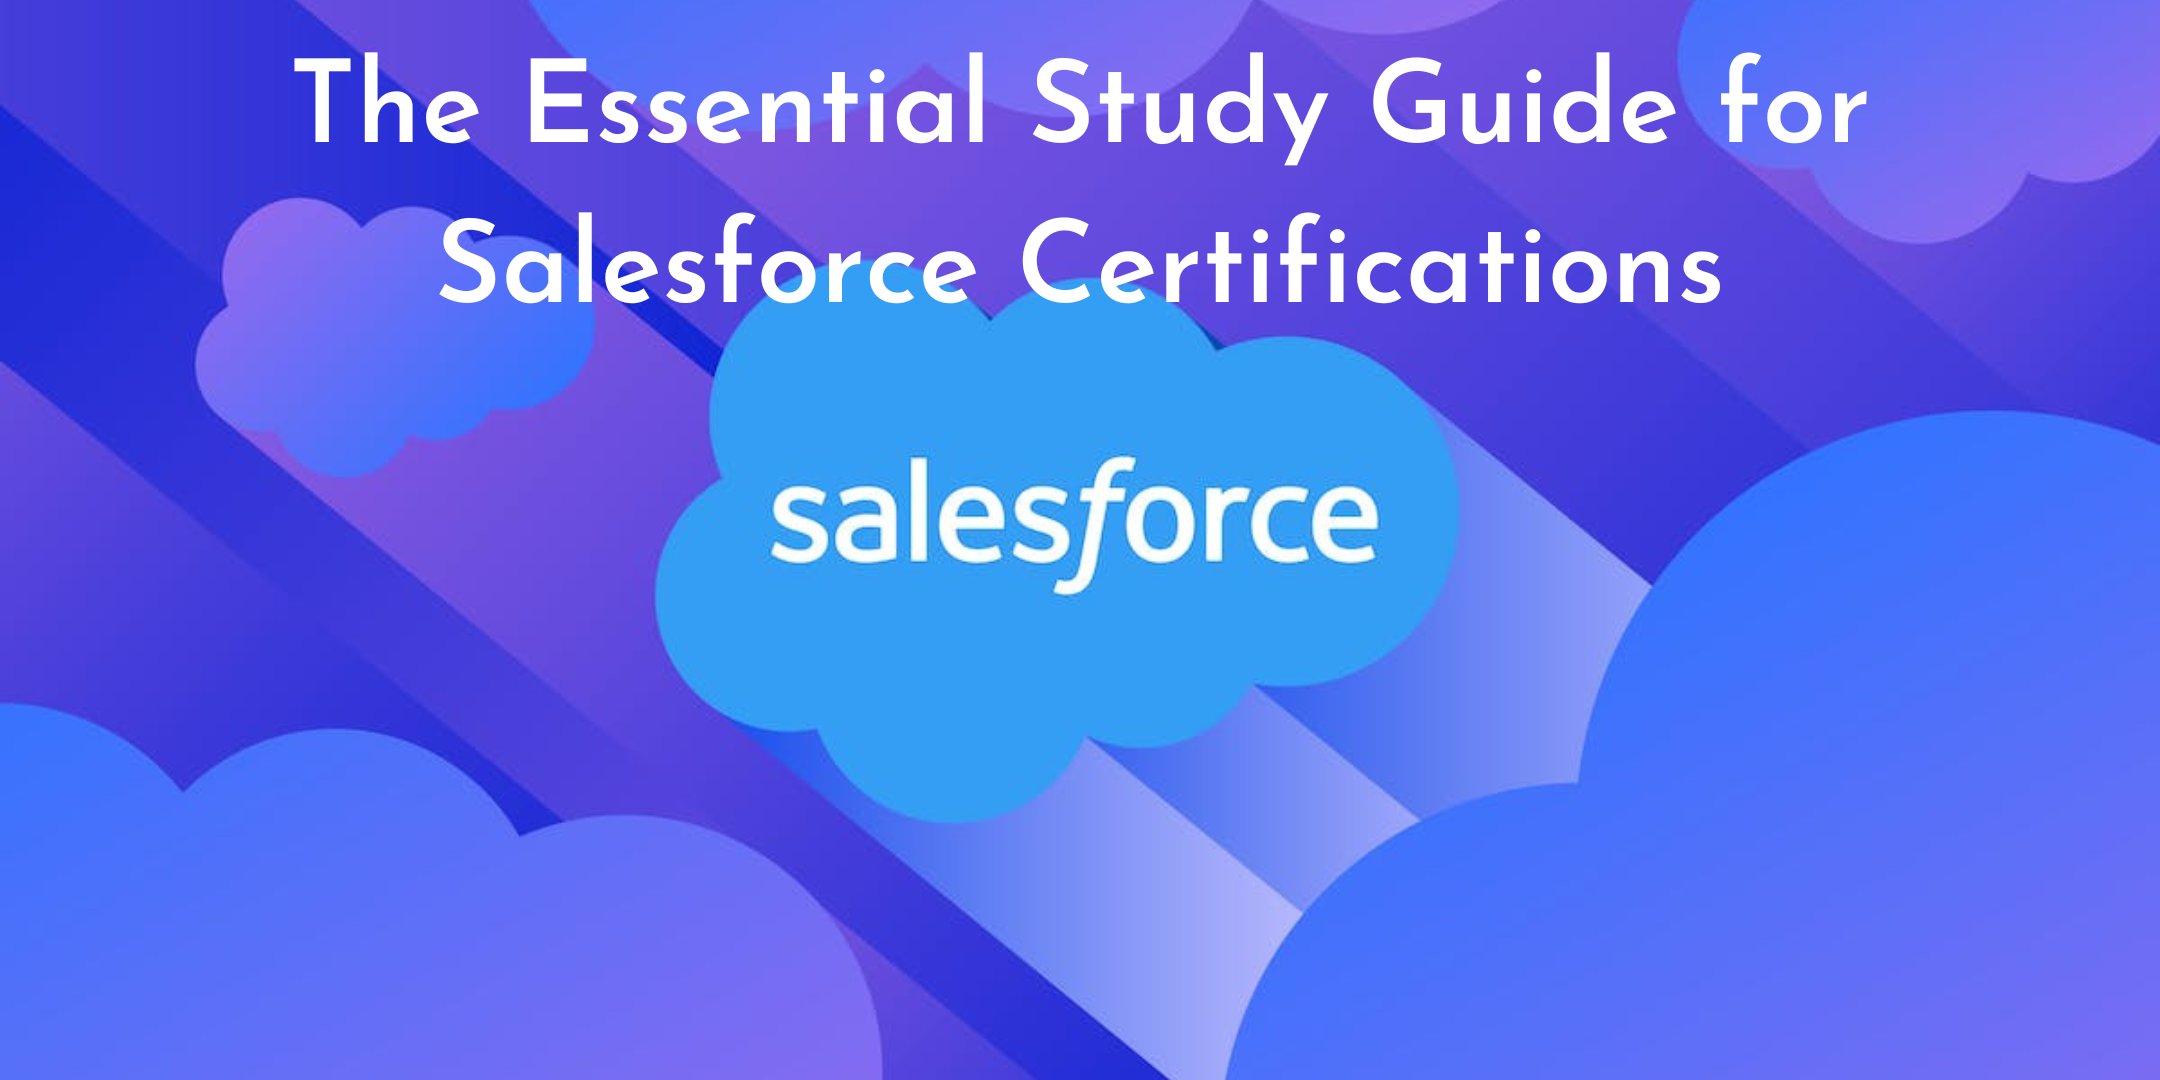 The Essential Study Guide for Salesforce Certifications